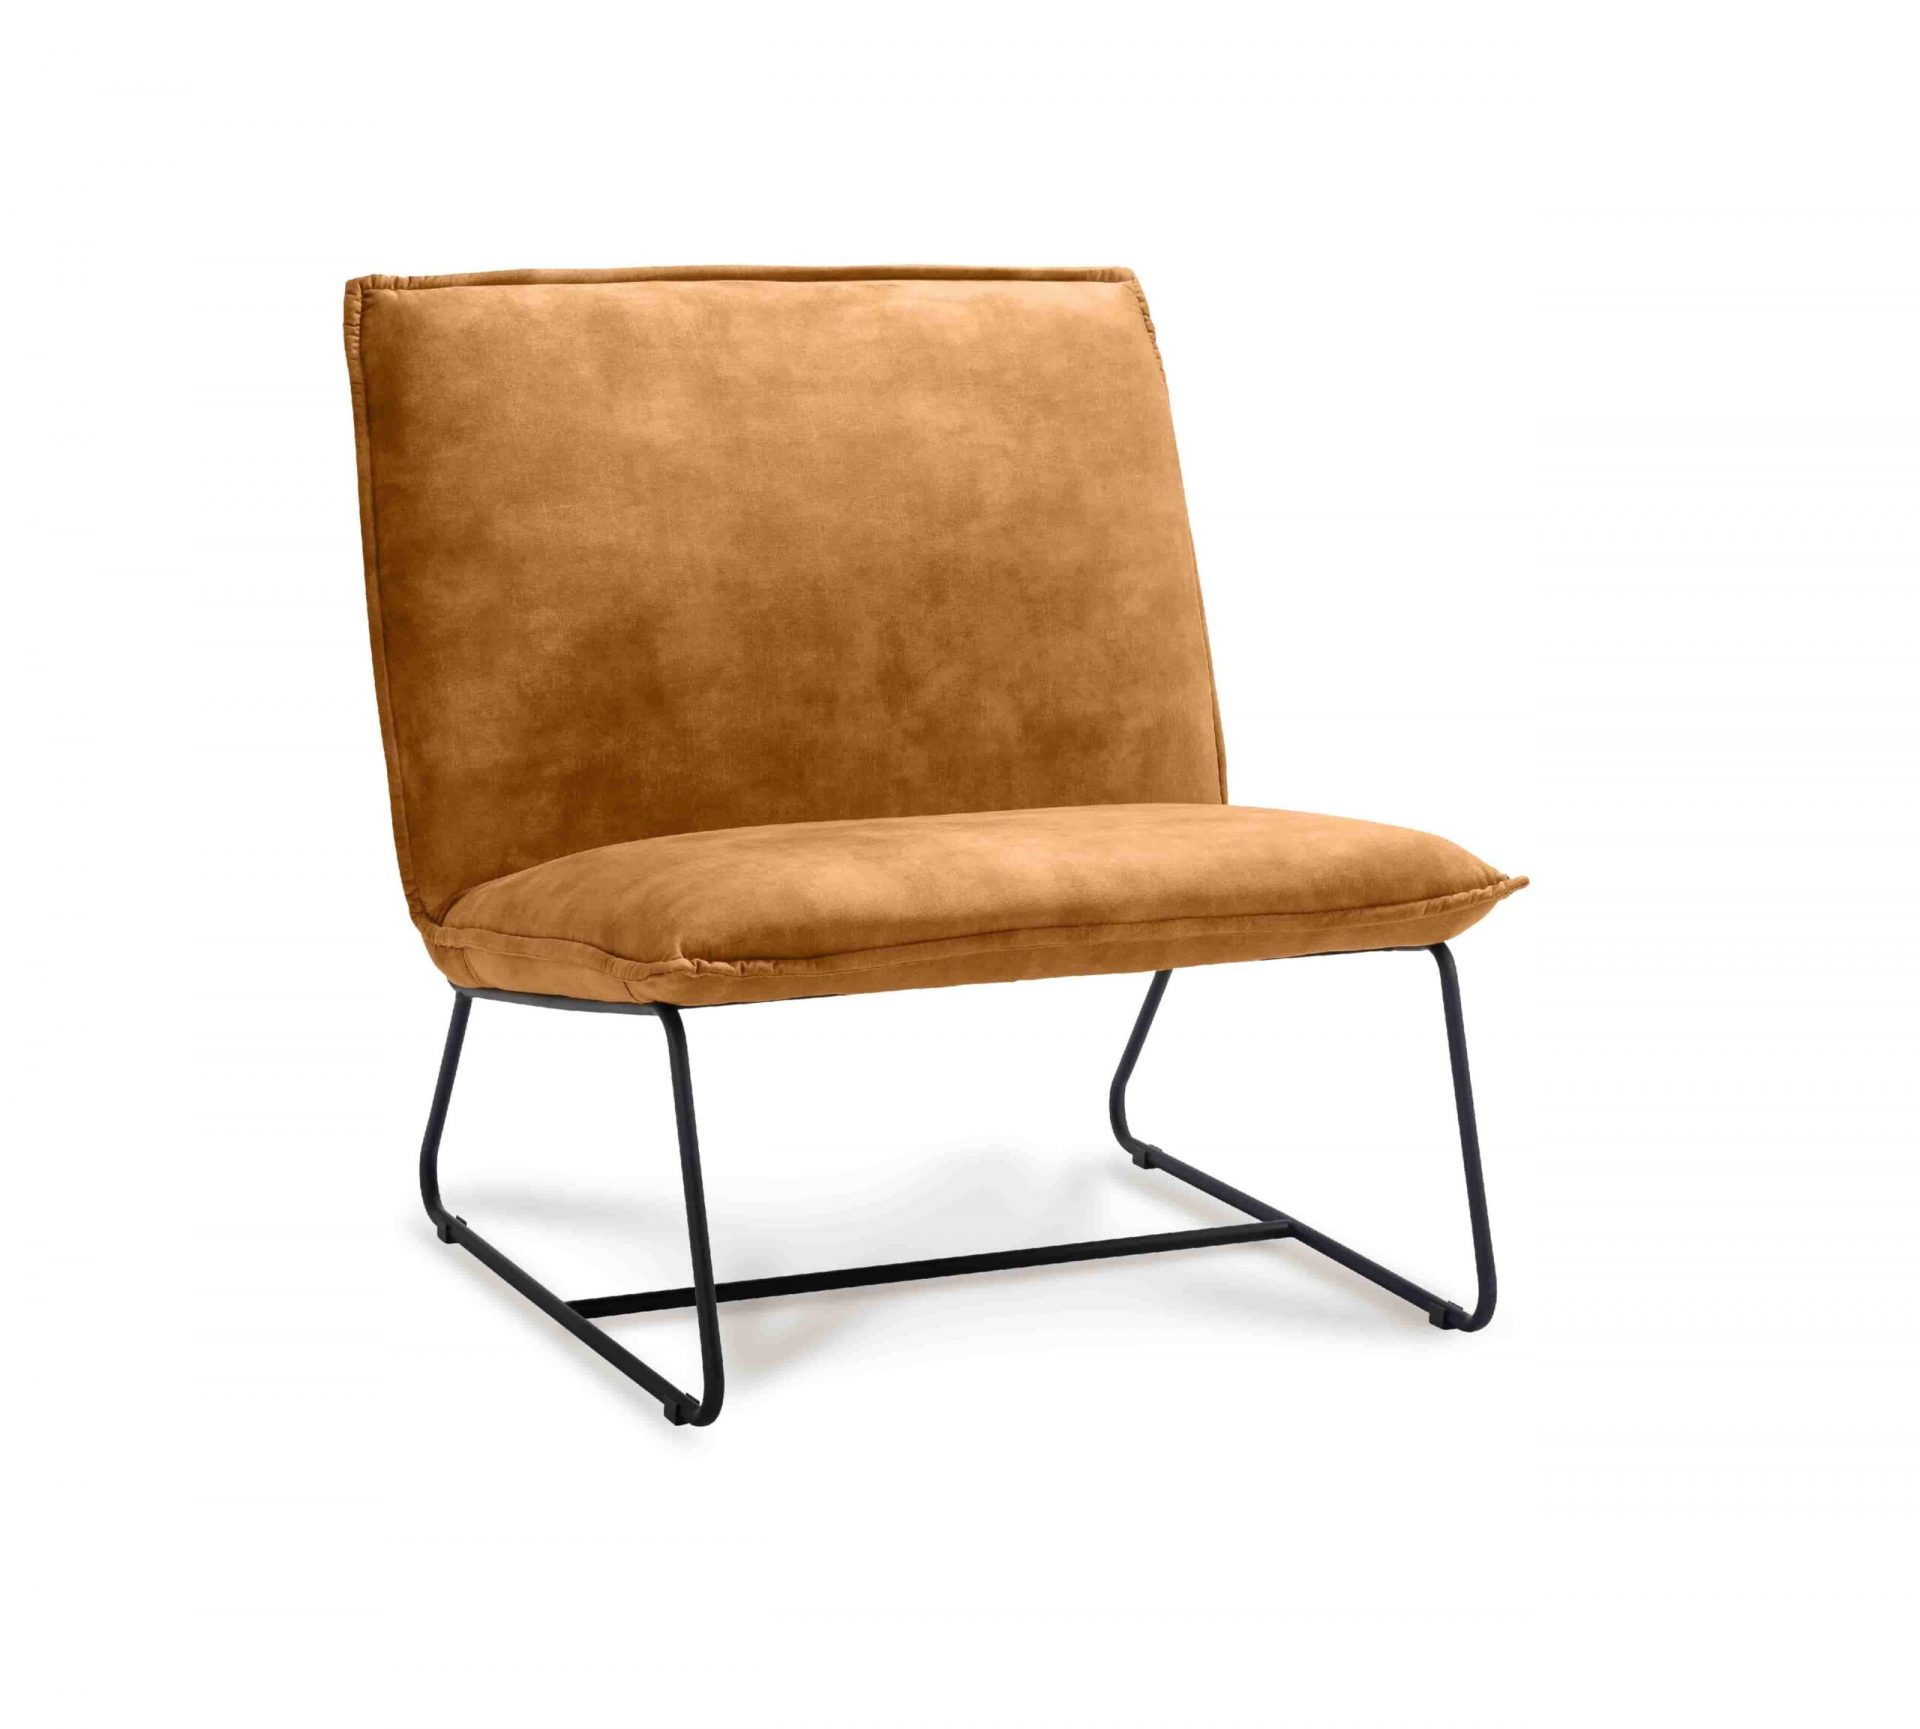 Conceit bouw Circulaire Fauteuil Chefman 1,5-zits - Velours stof - Mosterdgeel - WGXL Collection